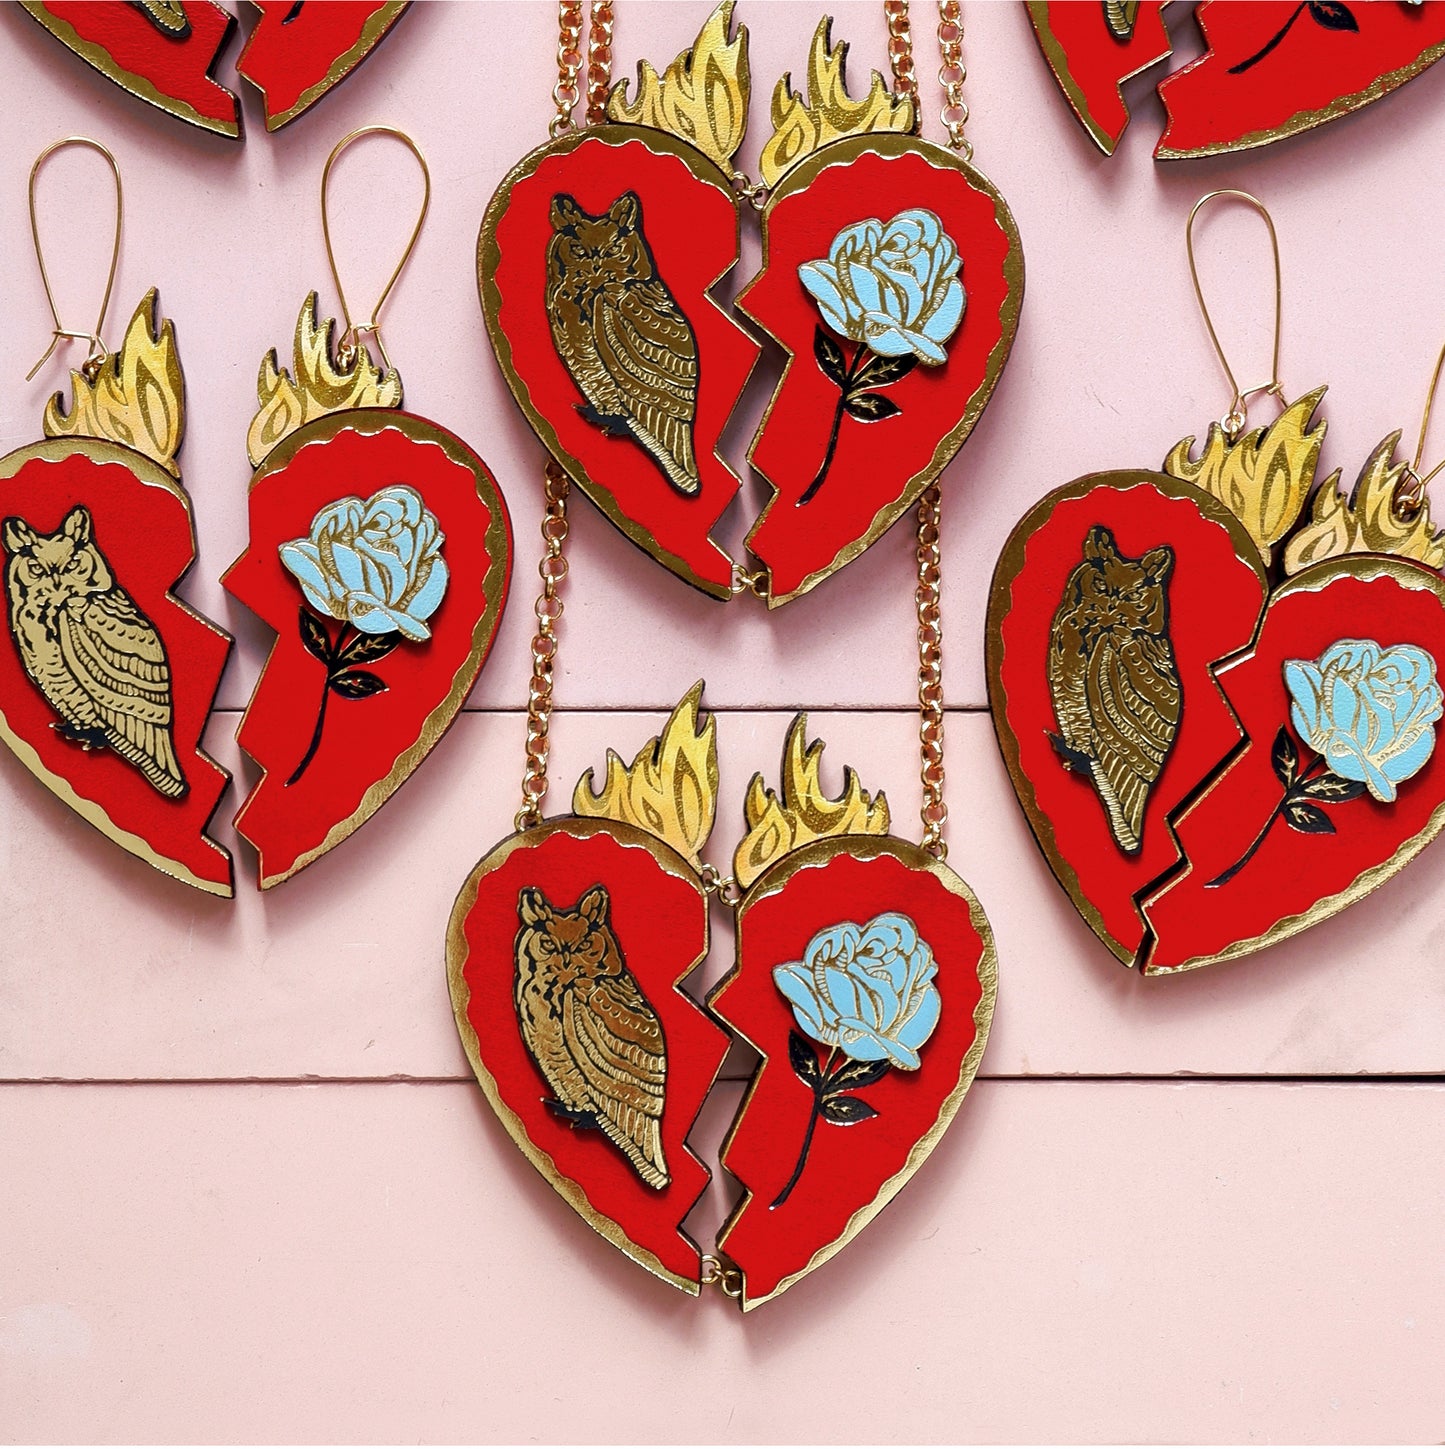  red leather broken heart pendants & earrings, with golden owls, flames & blue roses,  laid out flat on pink background